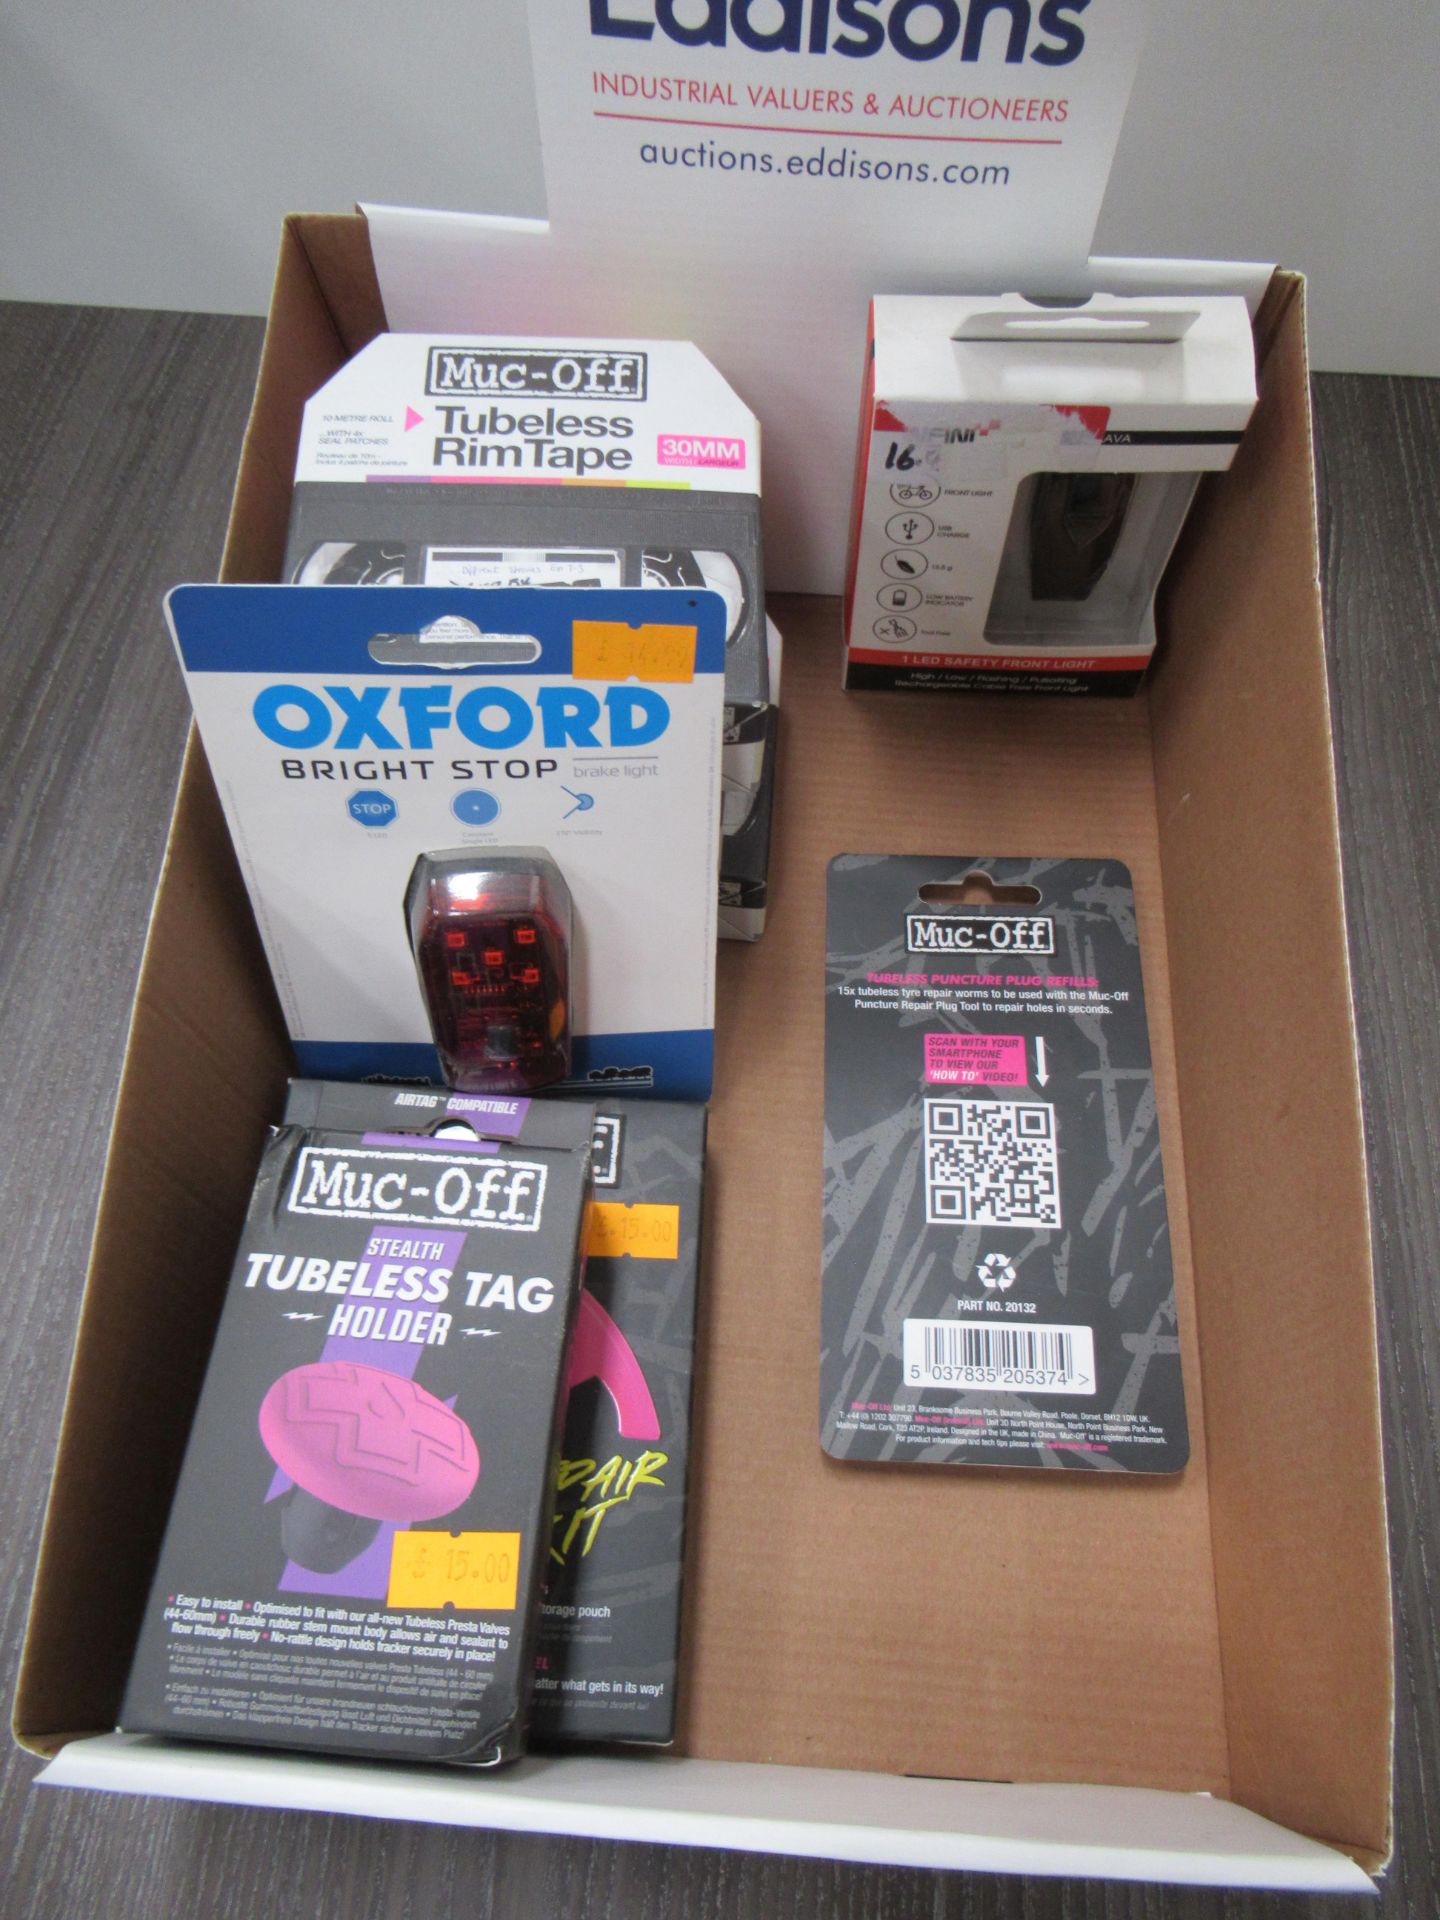 Contents of box to include Muc-Off tubeless rim tape, Muc-Off tubeless tags, Oxford brake lights, E - Image 3 of 3